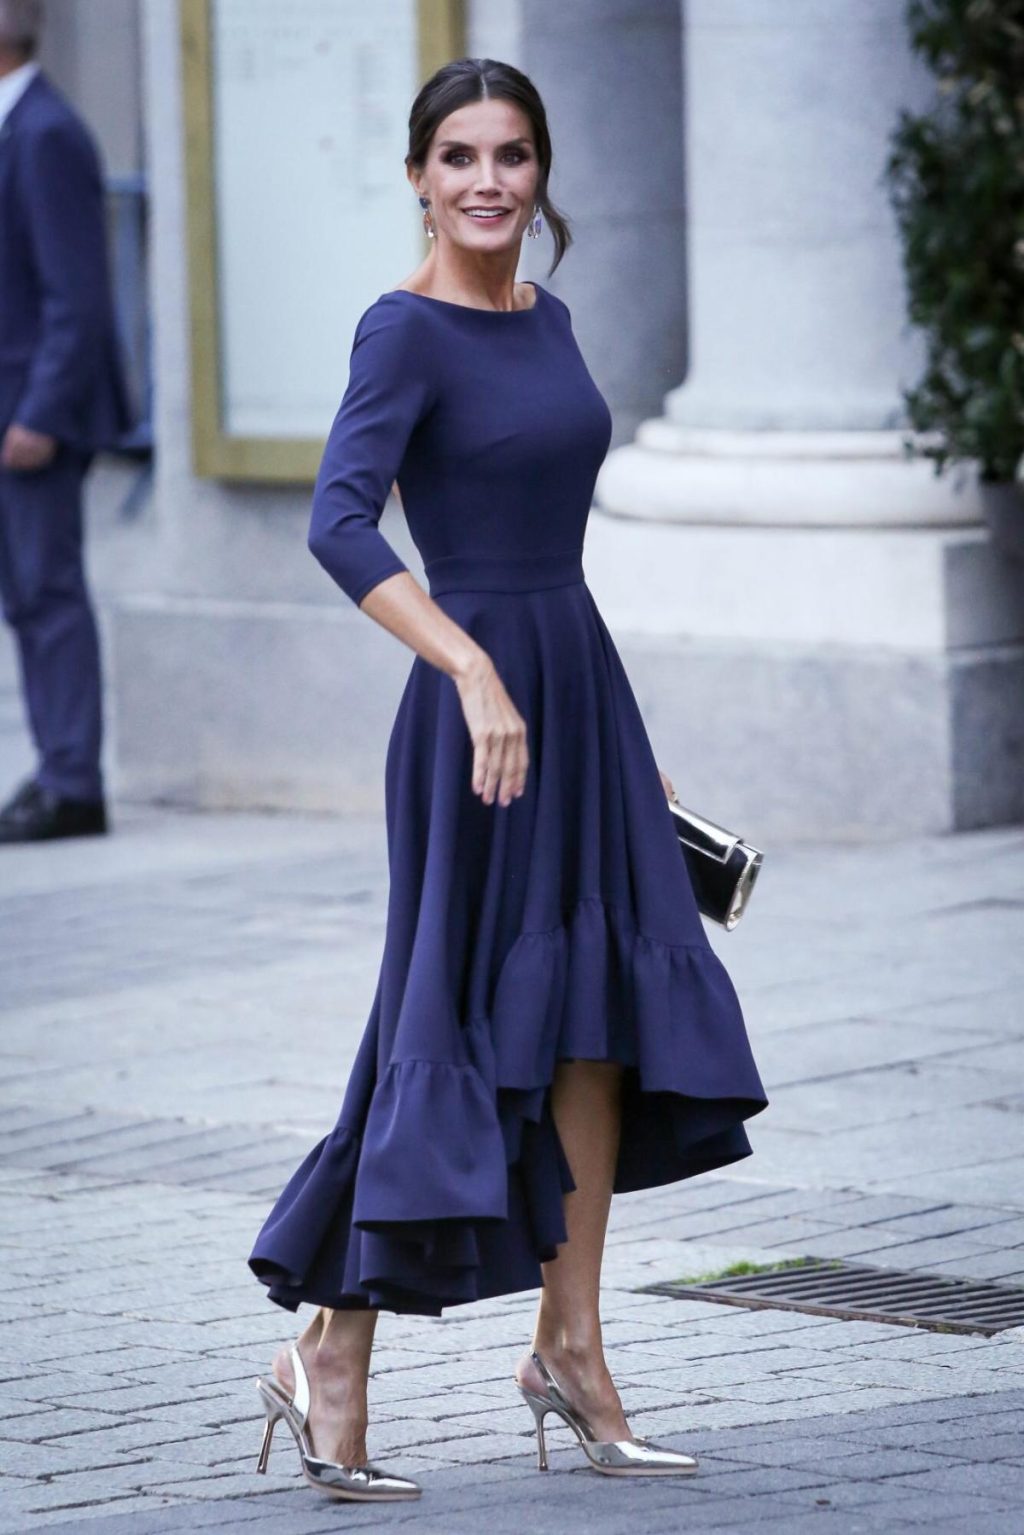 Queen Letizia leaves everyone speechless with one of the sexiest dresses she's ever worn.